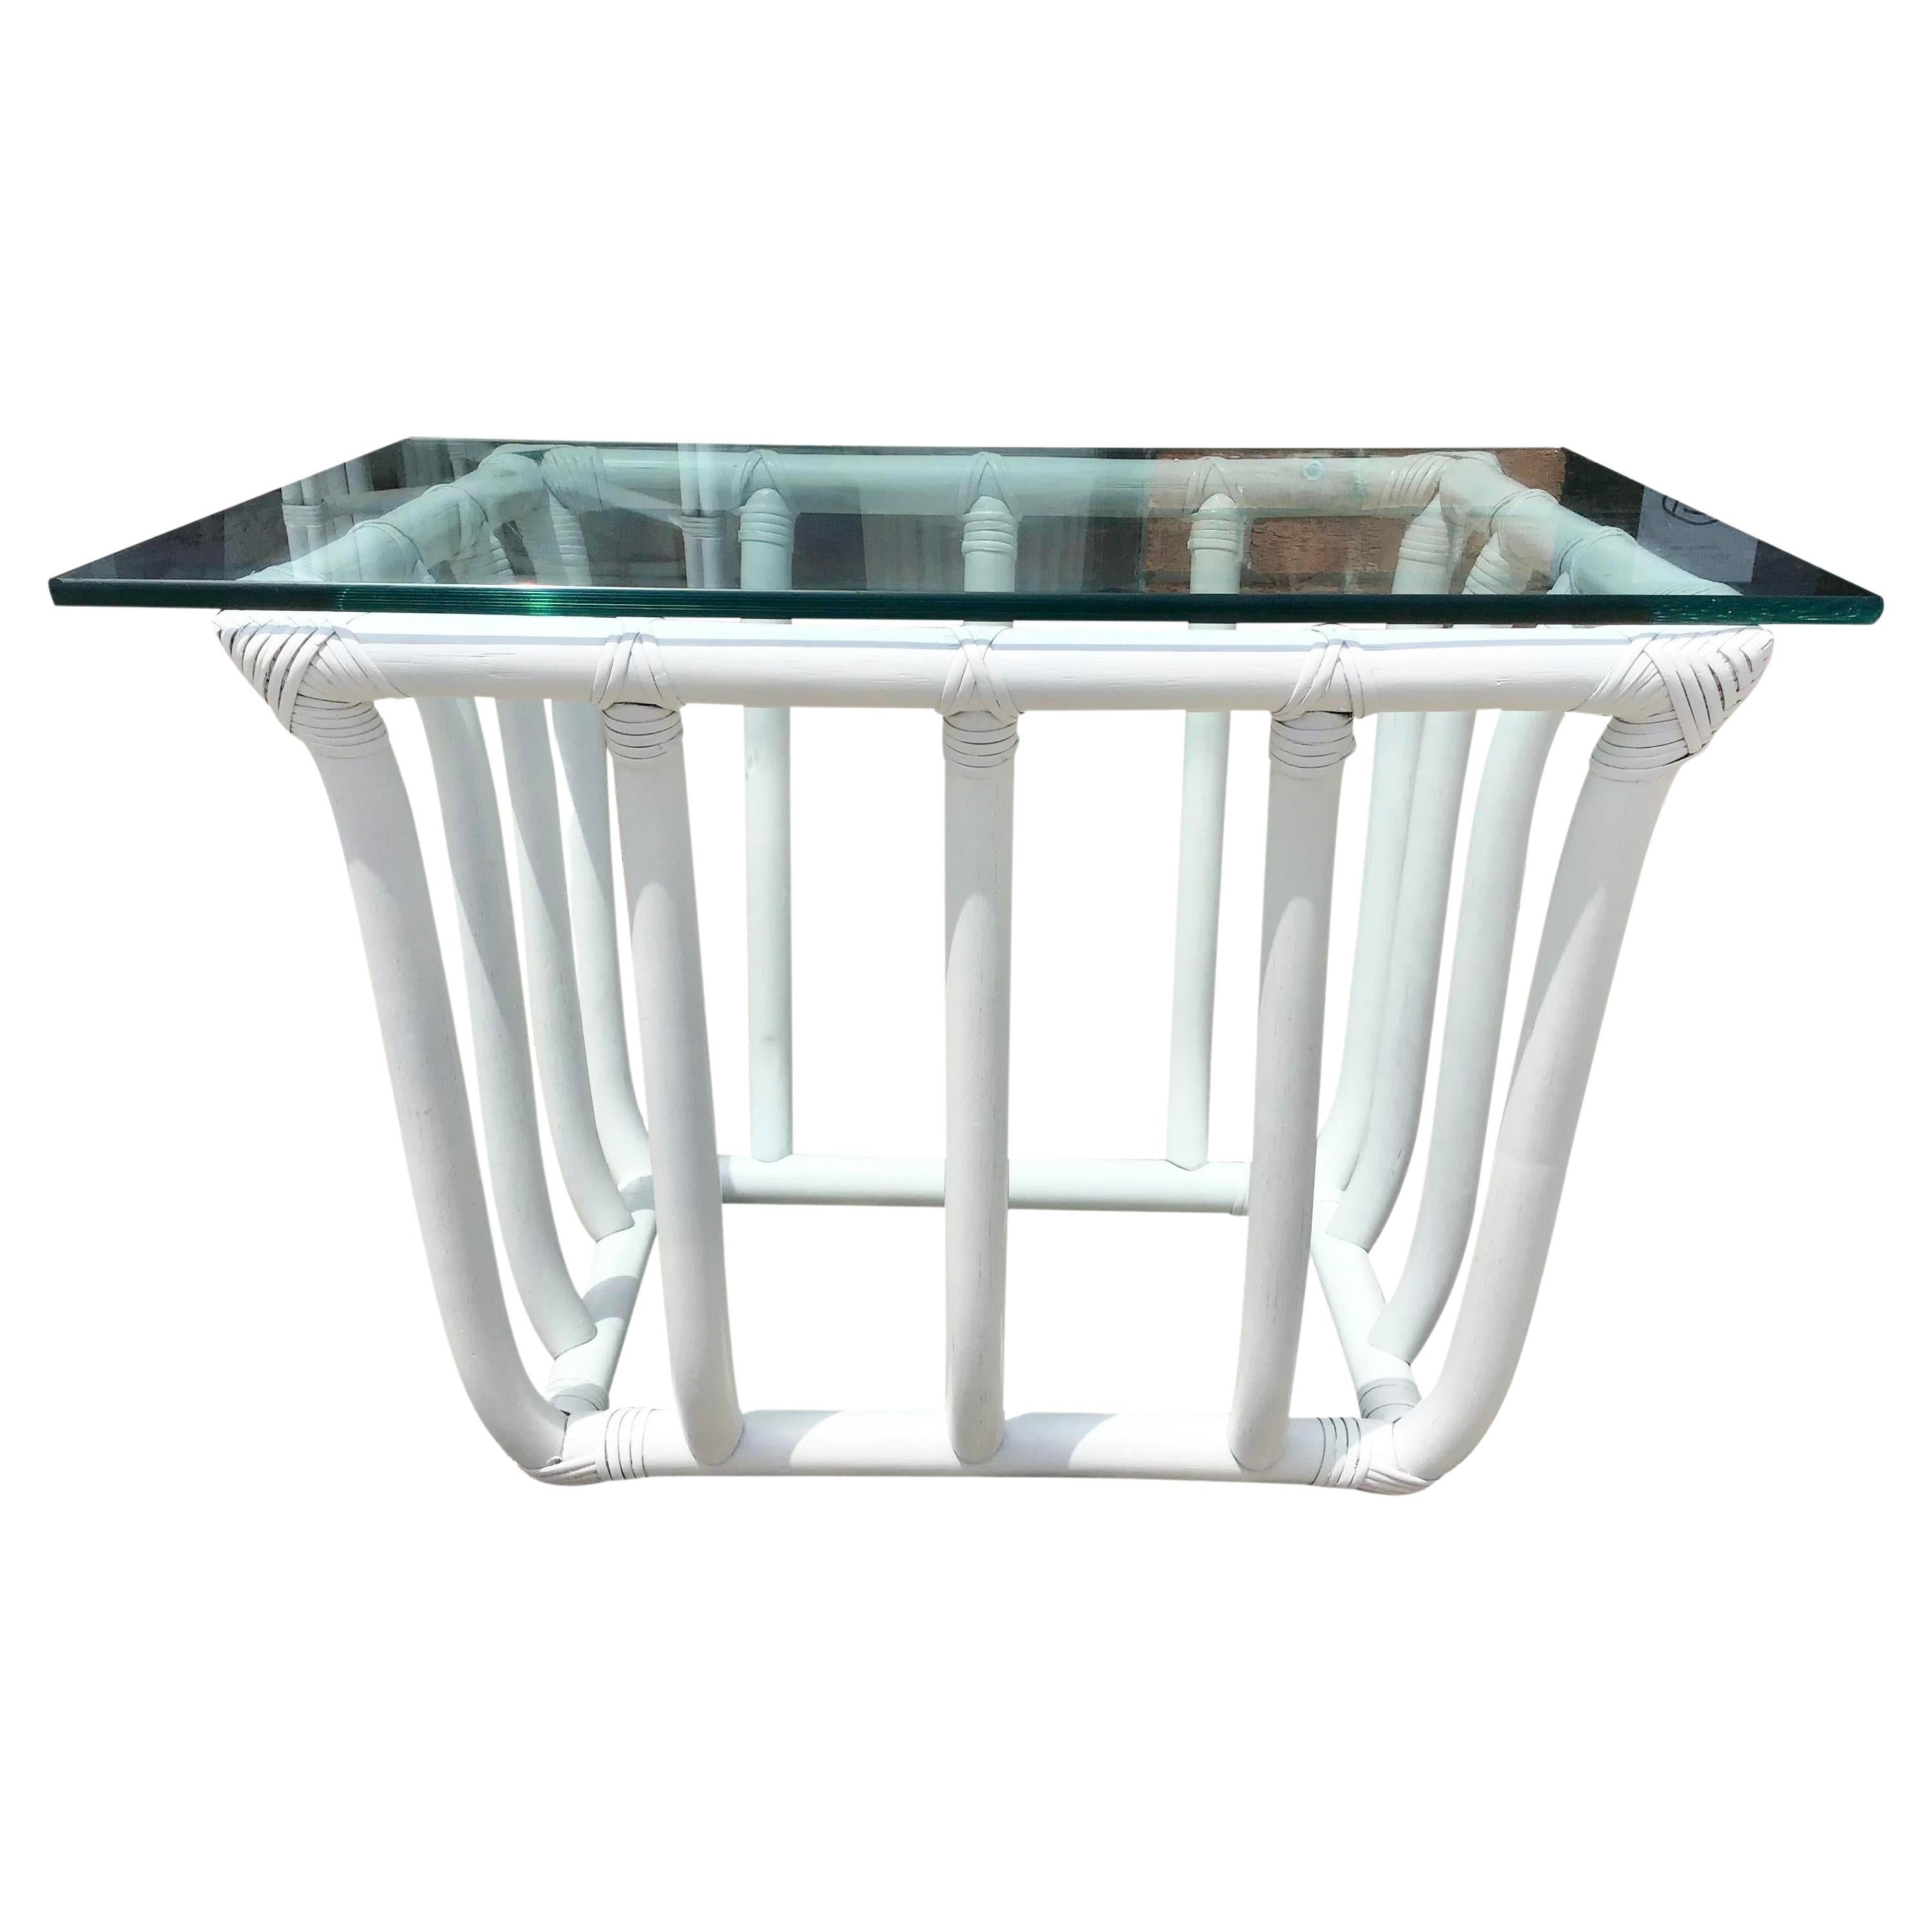 Table d'appoint rectangulaire en rotin blanc Boho Chic